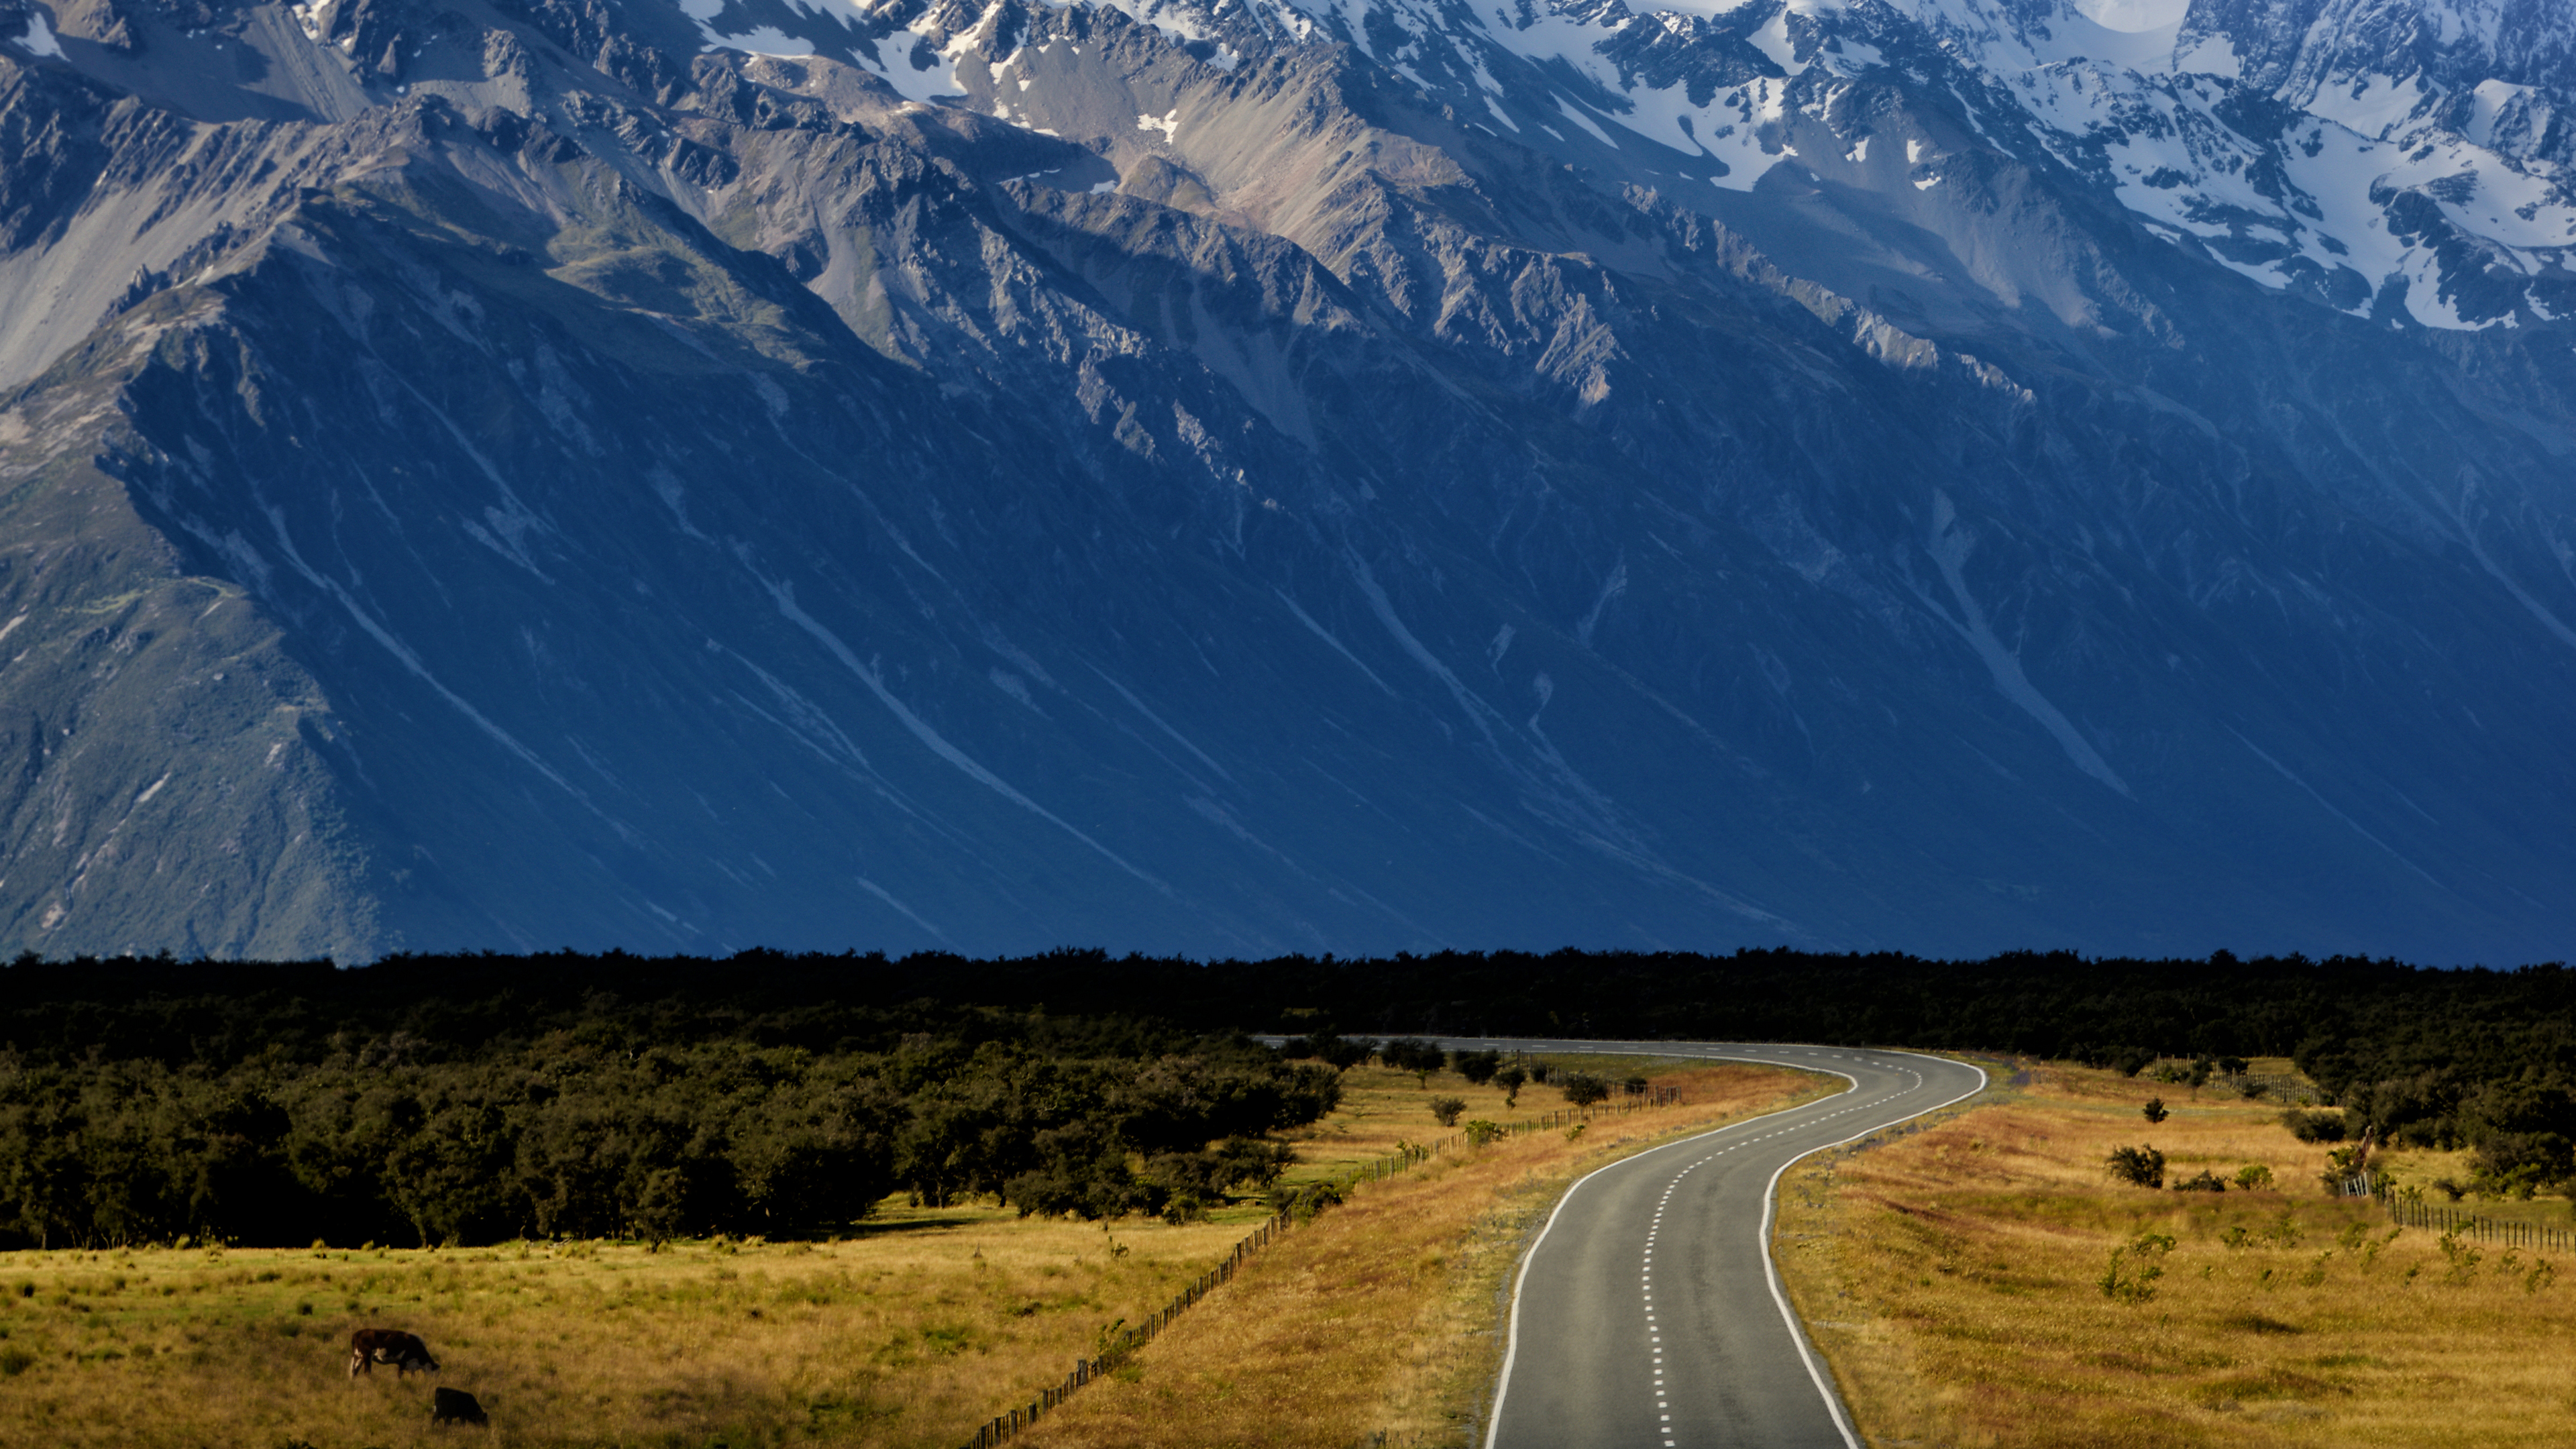 General 3840x2160 Trey Ratcliff photography landscape New Zealand nature road mountains